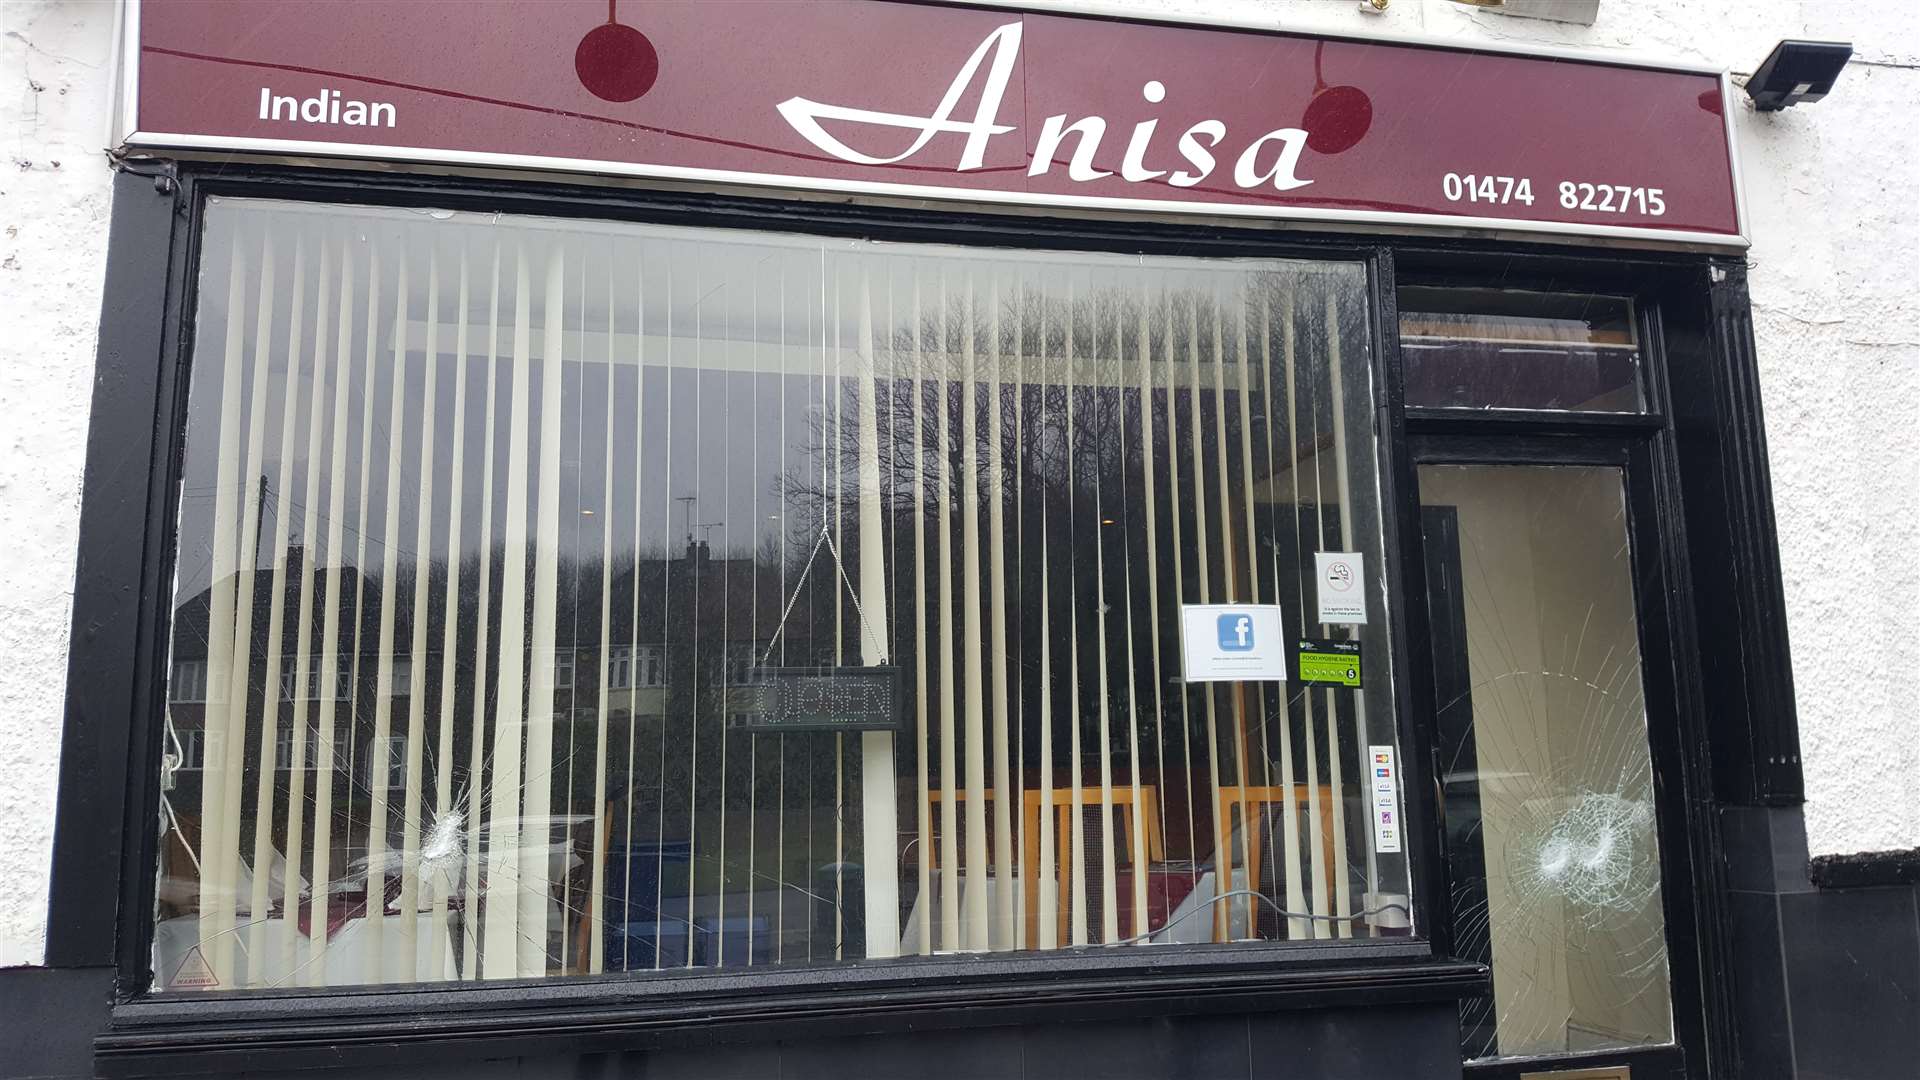 Damage to the window and front door of Anisa Indian Cuisine